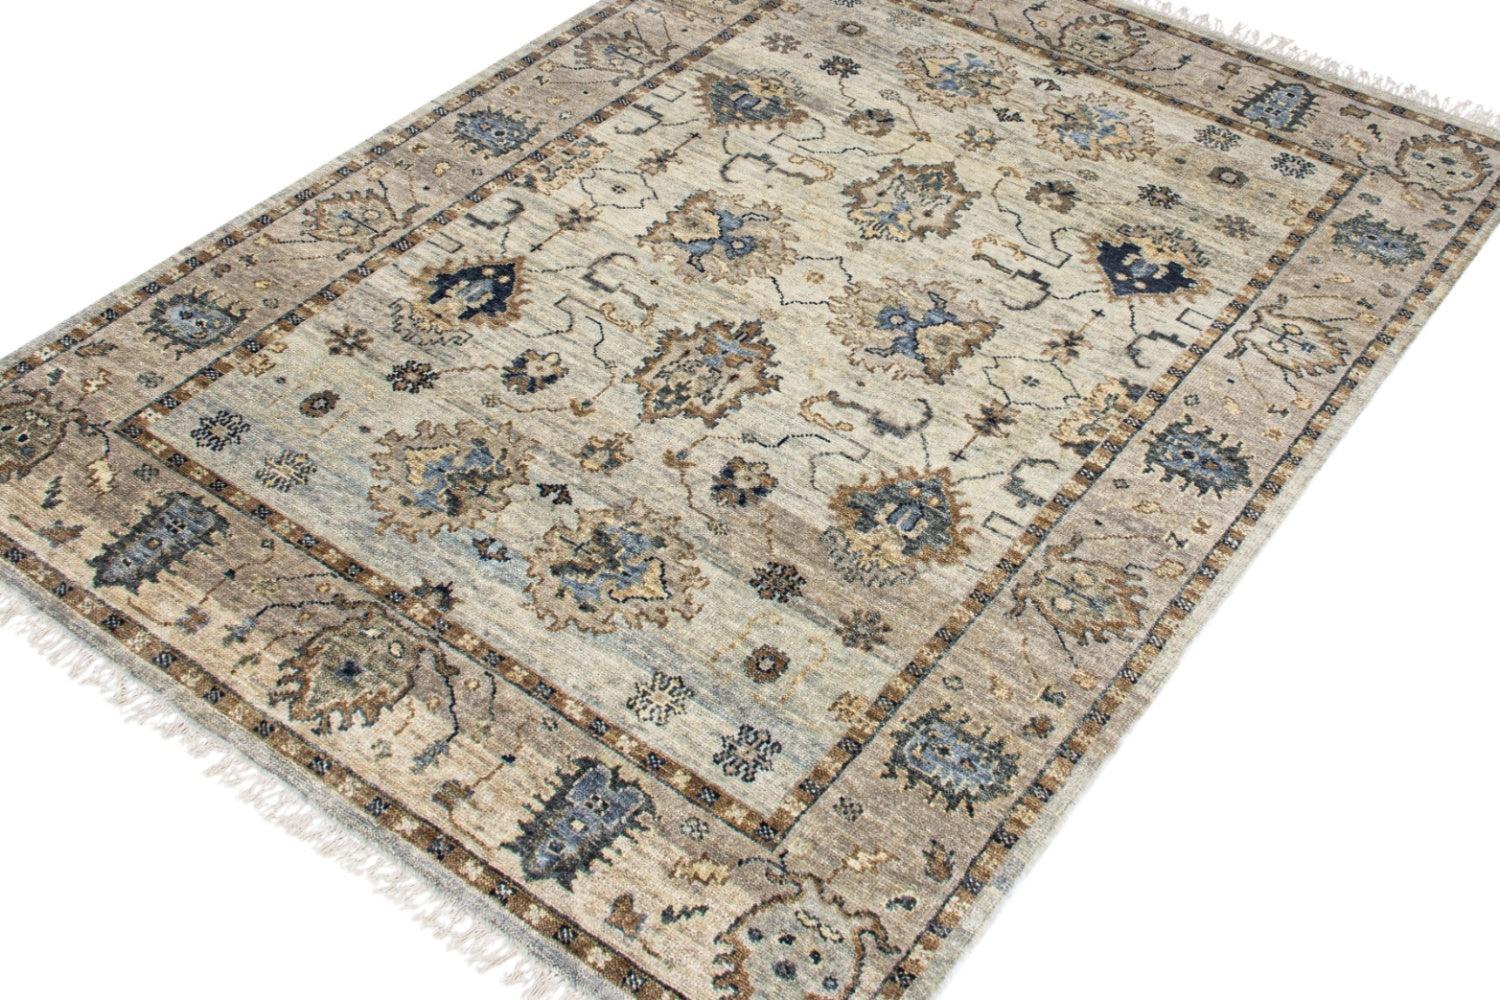 Sultanabad 5 Handwoven Traditional Rug, J72576